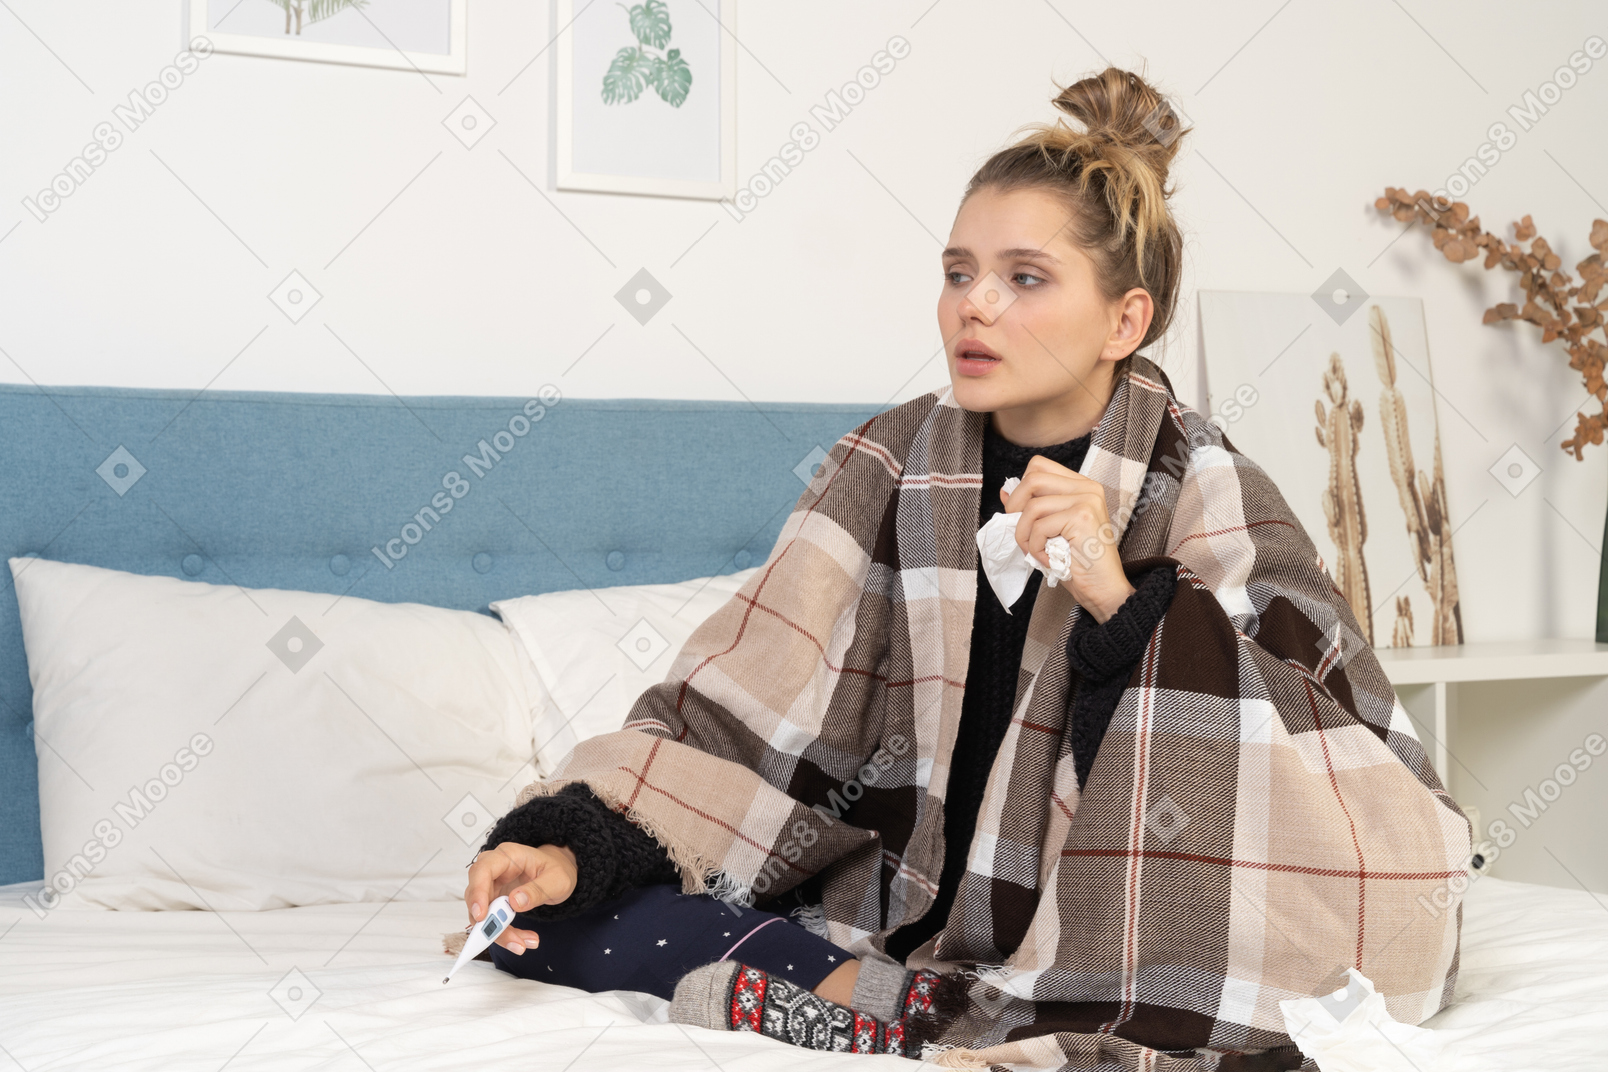 Front view of an ill young lady in pajamas wrapped in checked blanket in bed